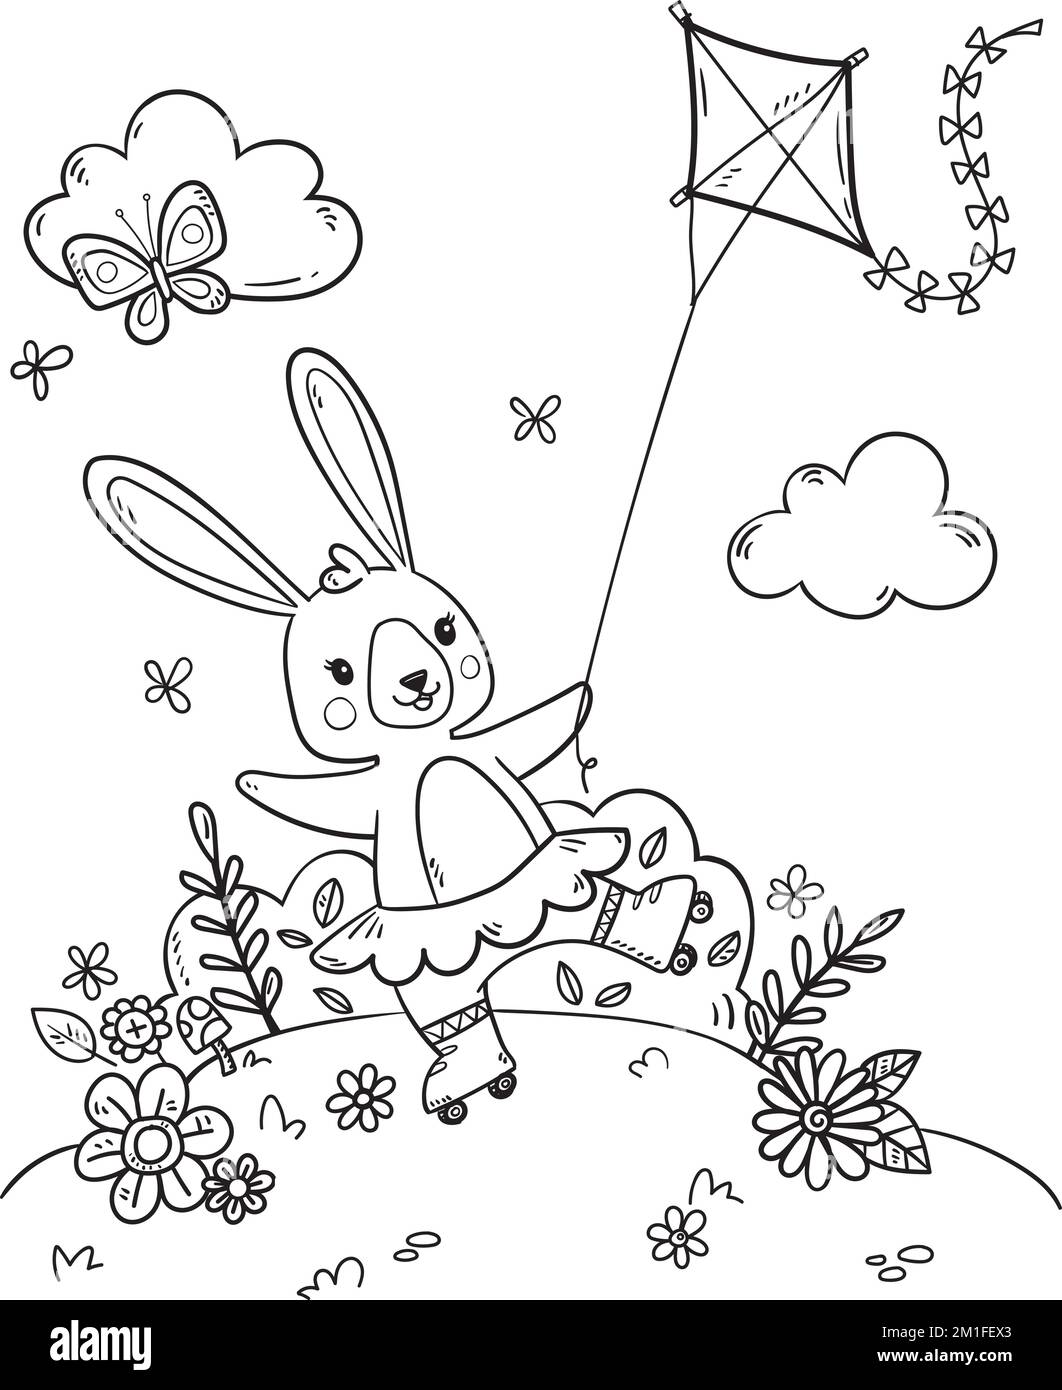 Rollerskating bunny coloring page illustration Stock Vector